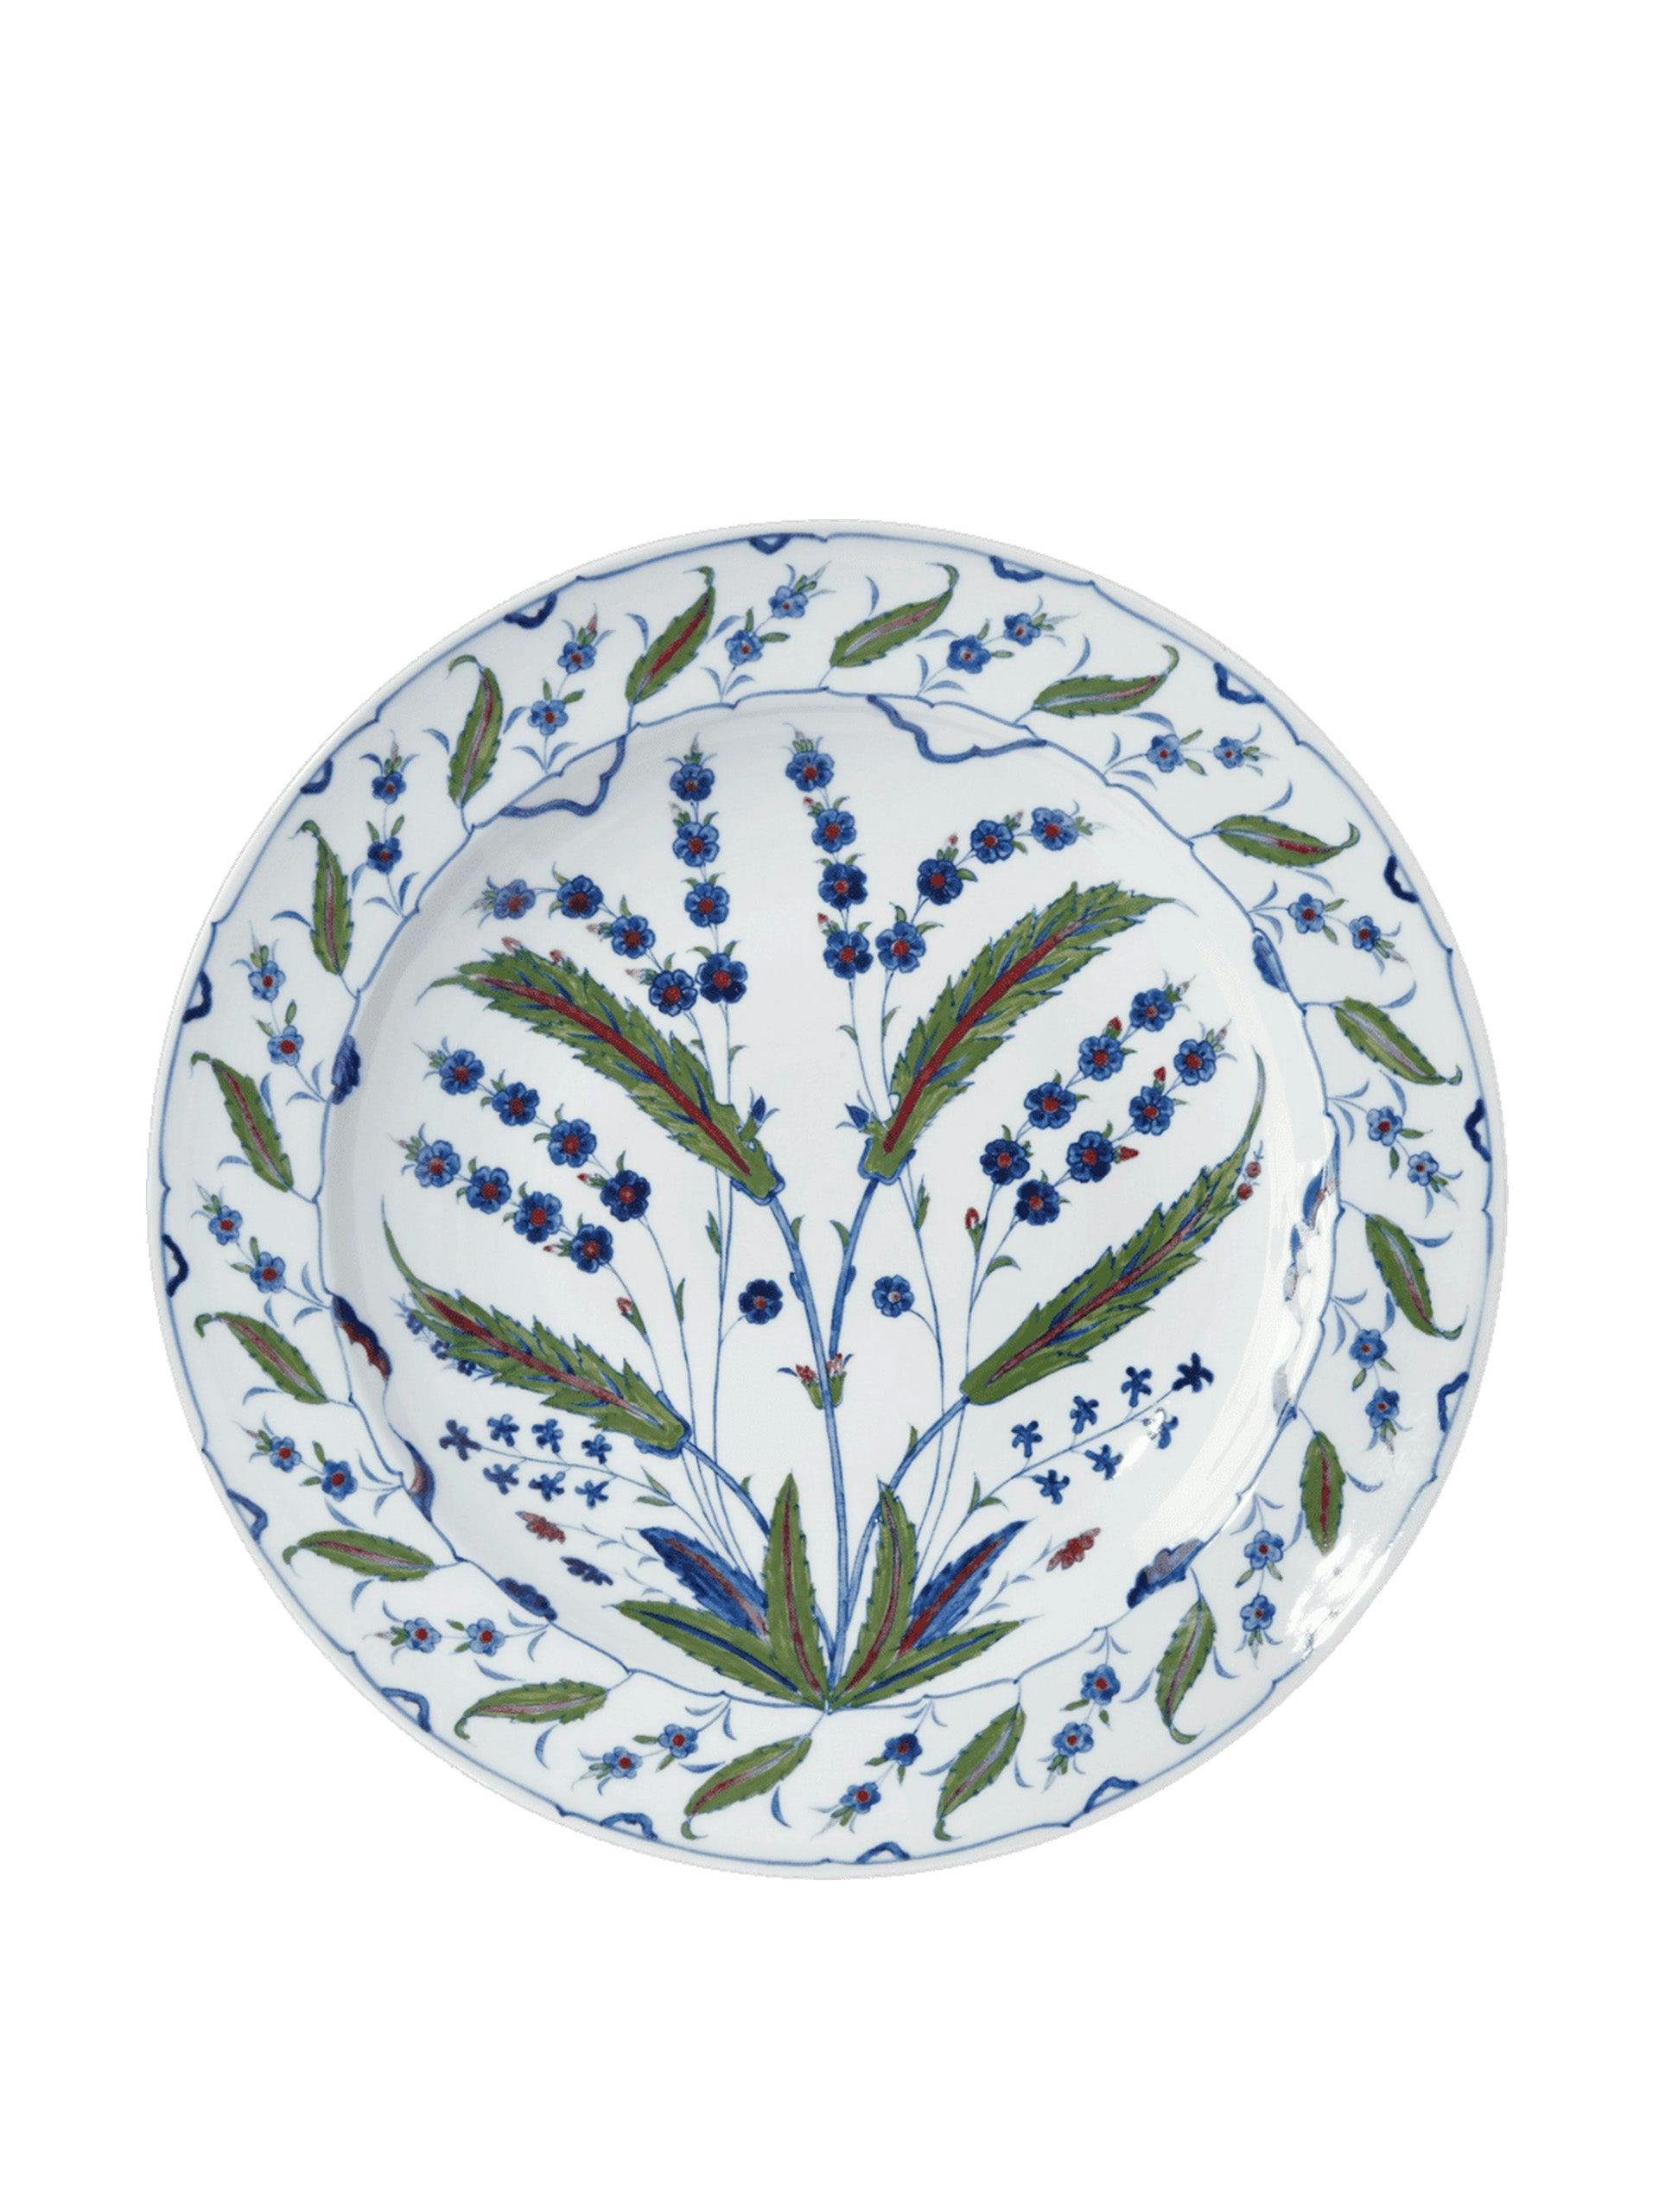 Isphahan porcelain giant charger plate